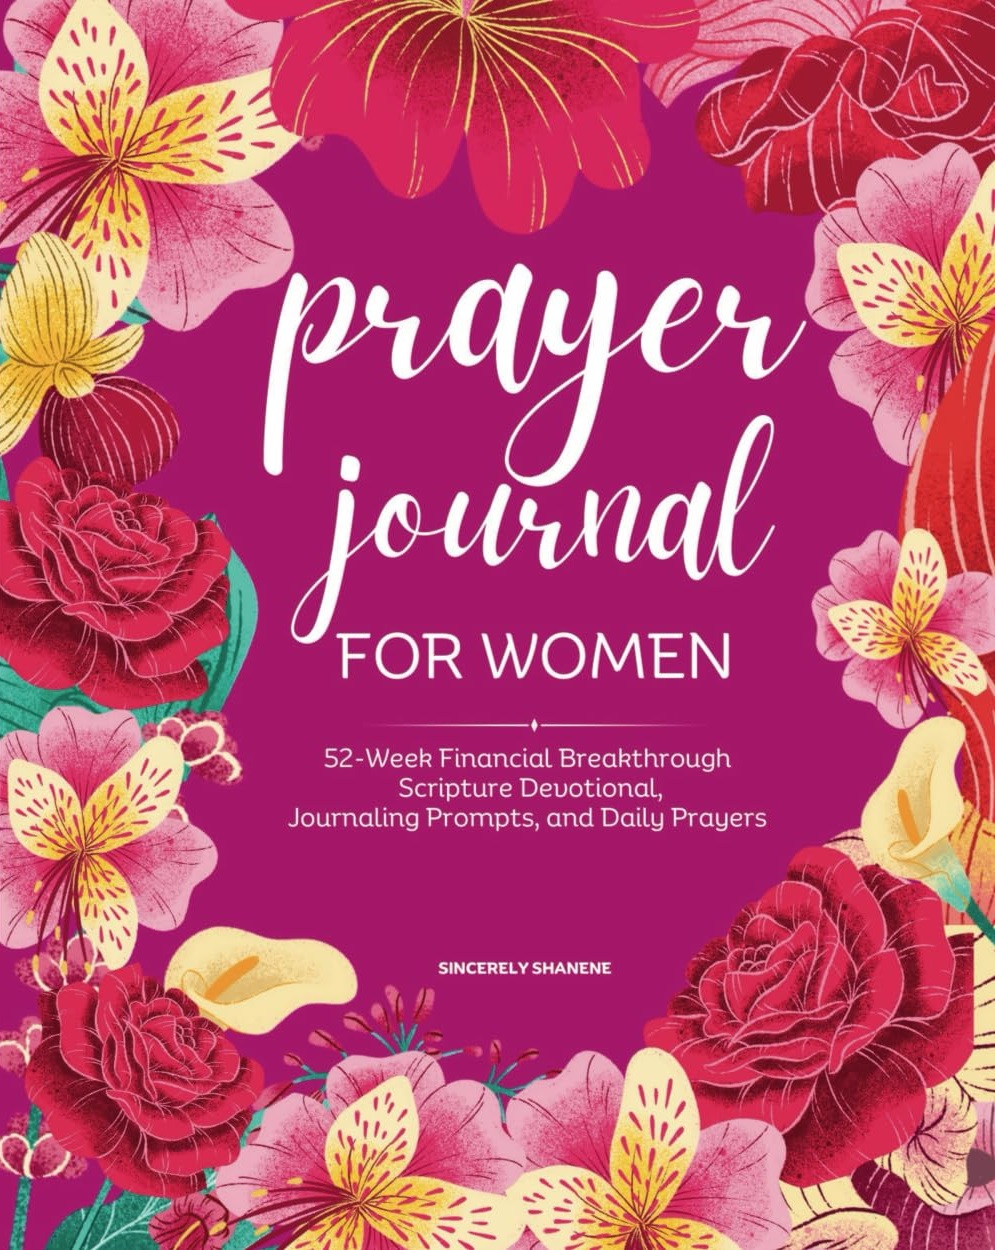 Sincerely Shanene Releases Revolutionary New Prayer Journal Creating Opportunities for Economic Empowerment of Women 